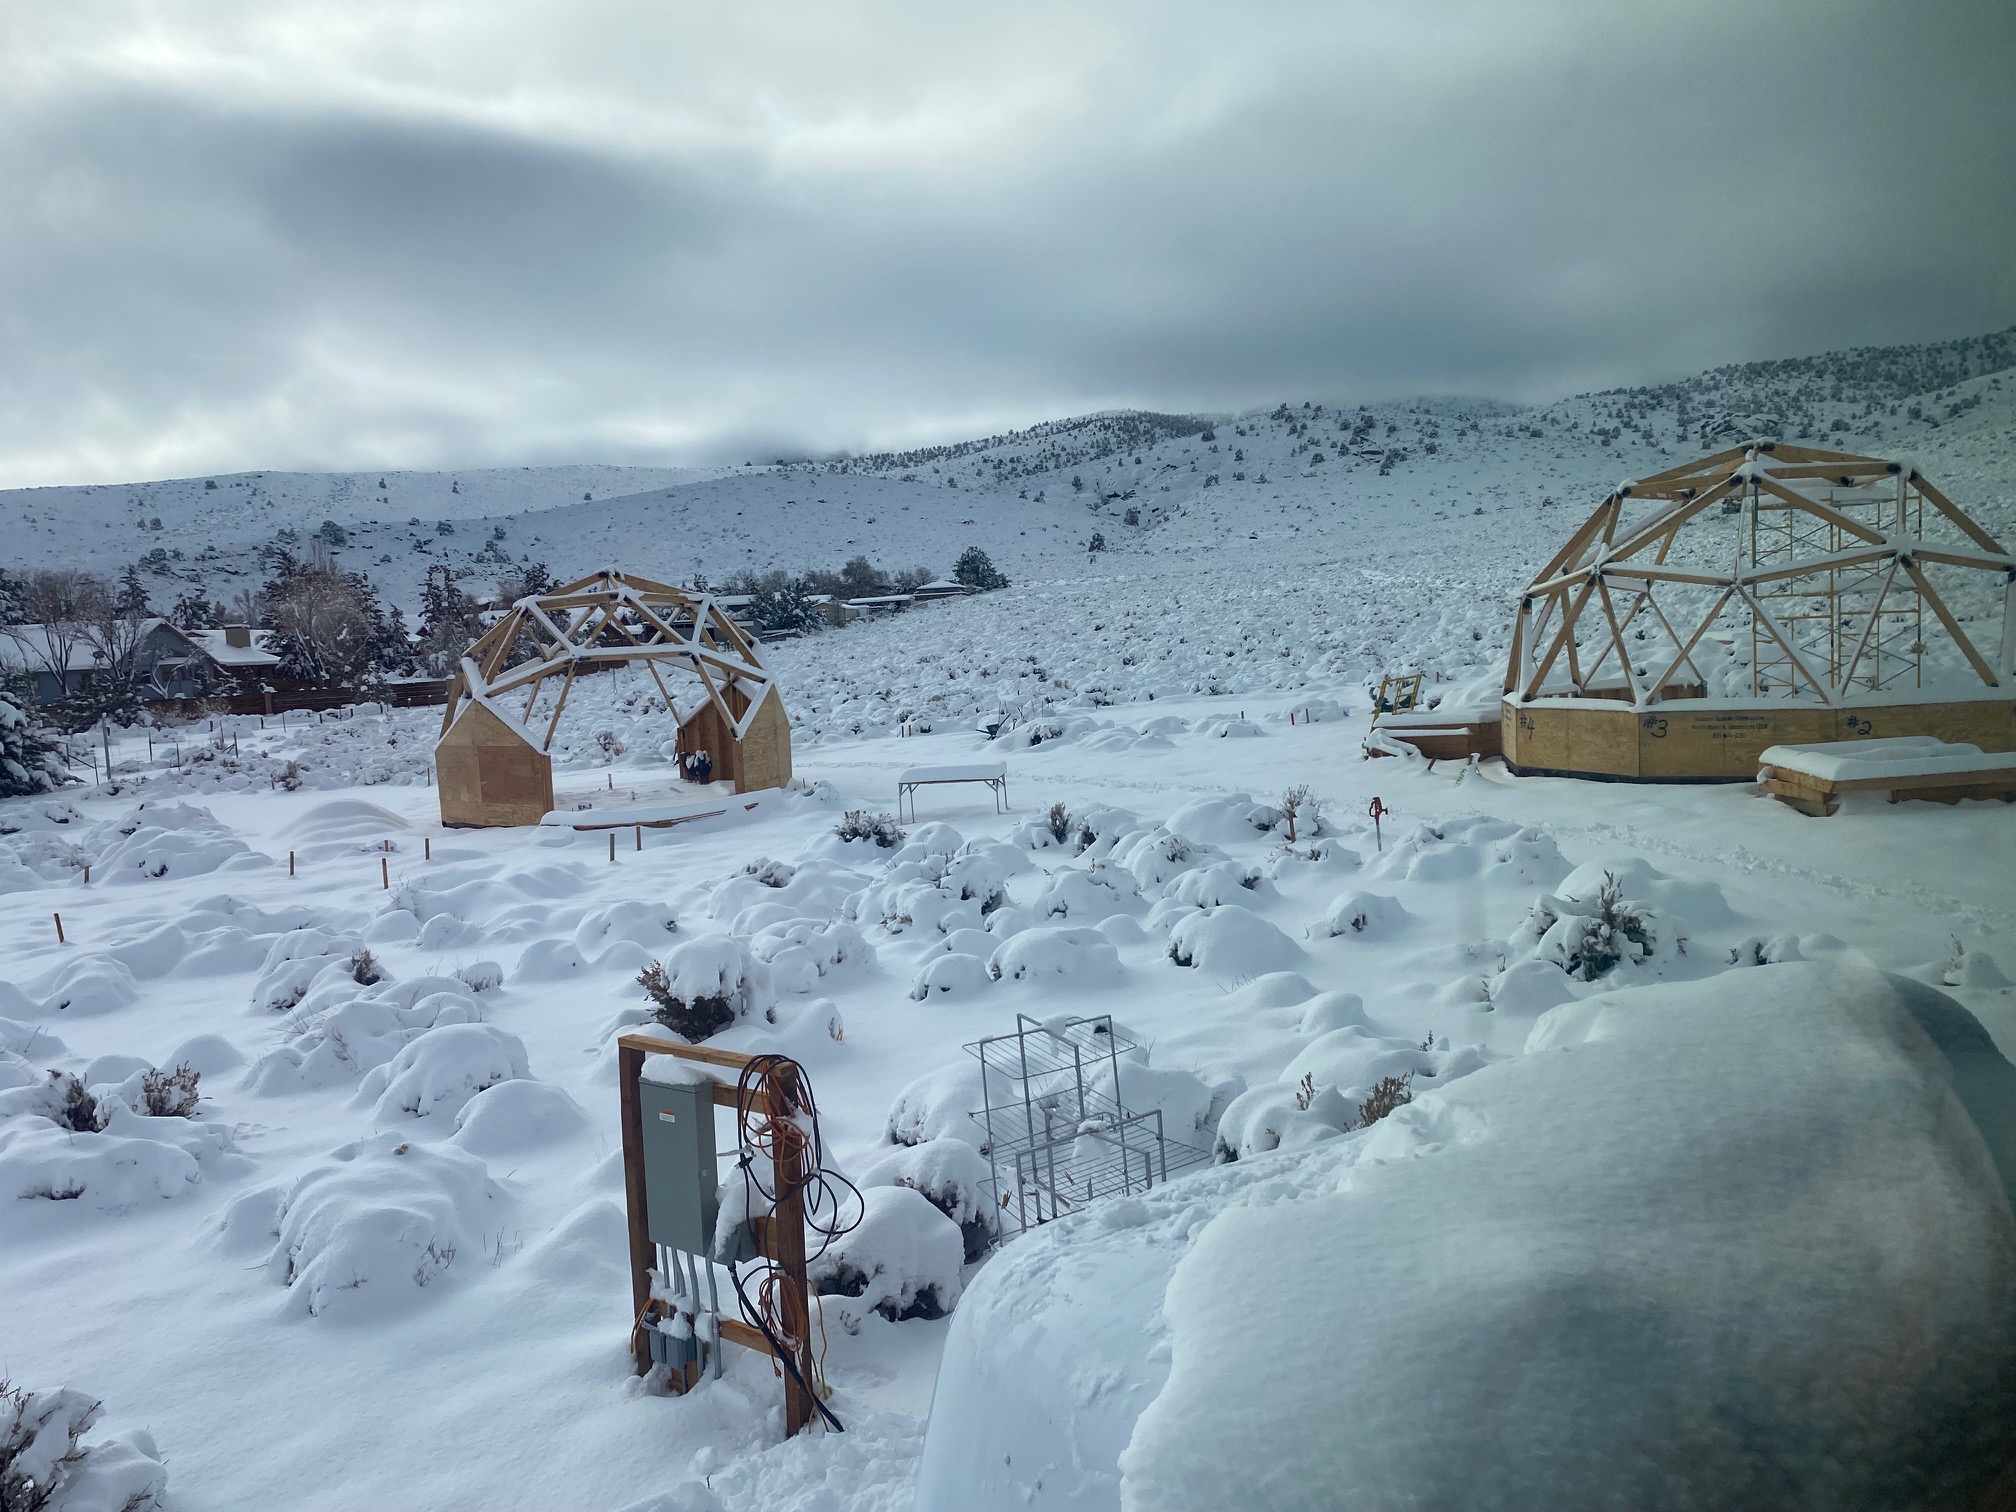 2 partially constructed geodesic dome buildings in a snowy landscape